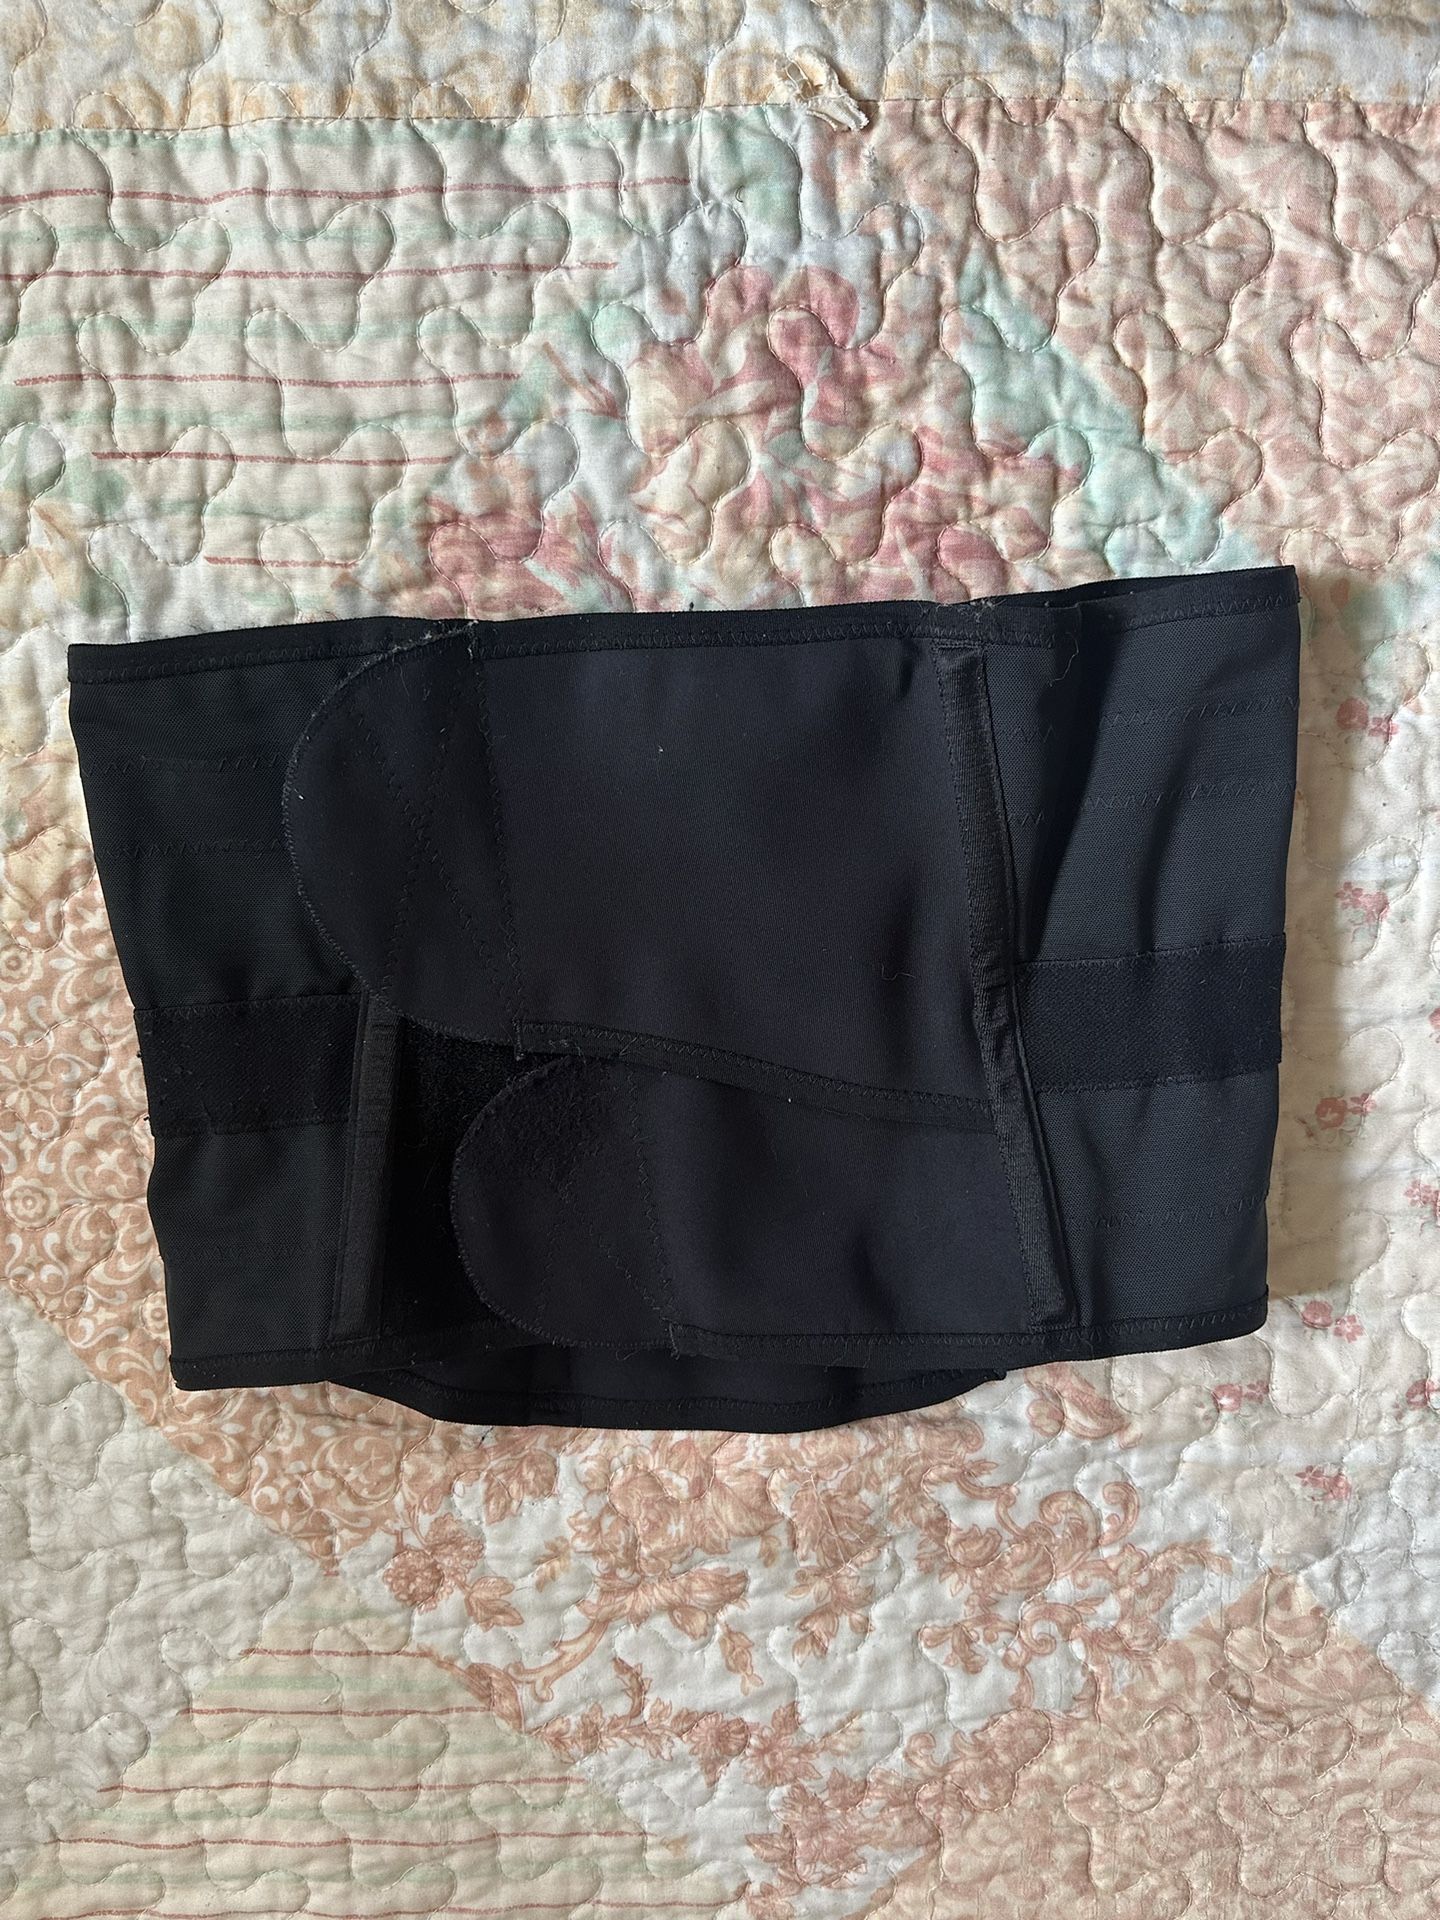 Belly Bandit Postpartum Luxe Belly Wrap